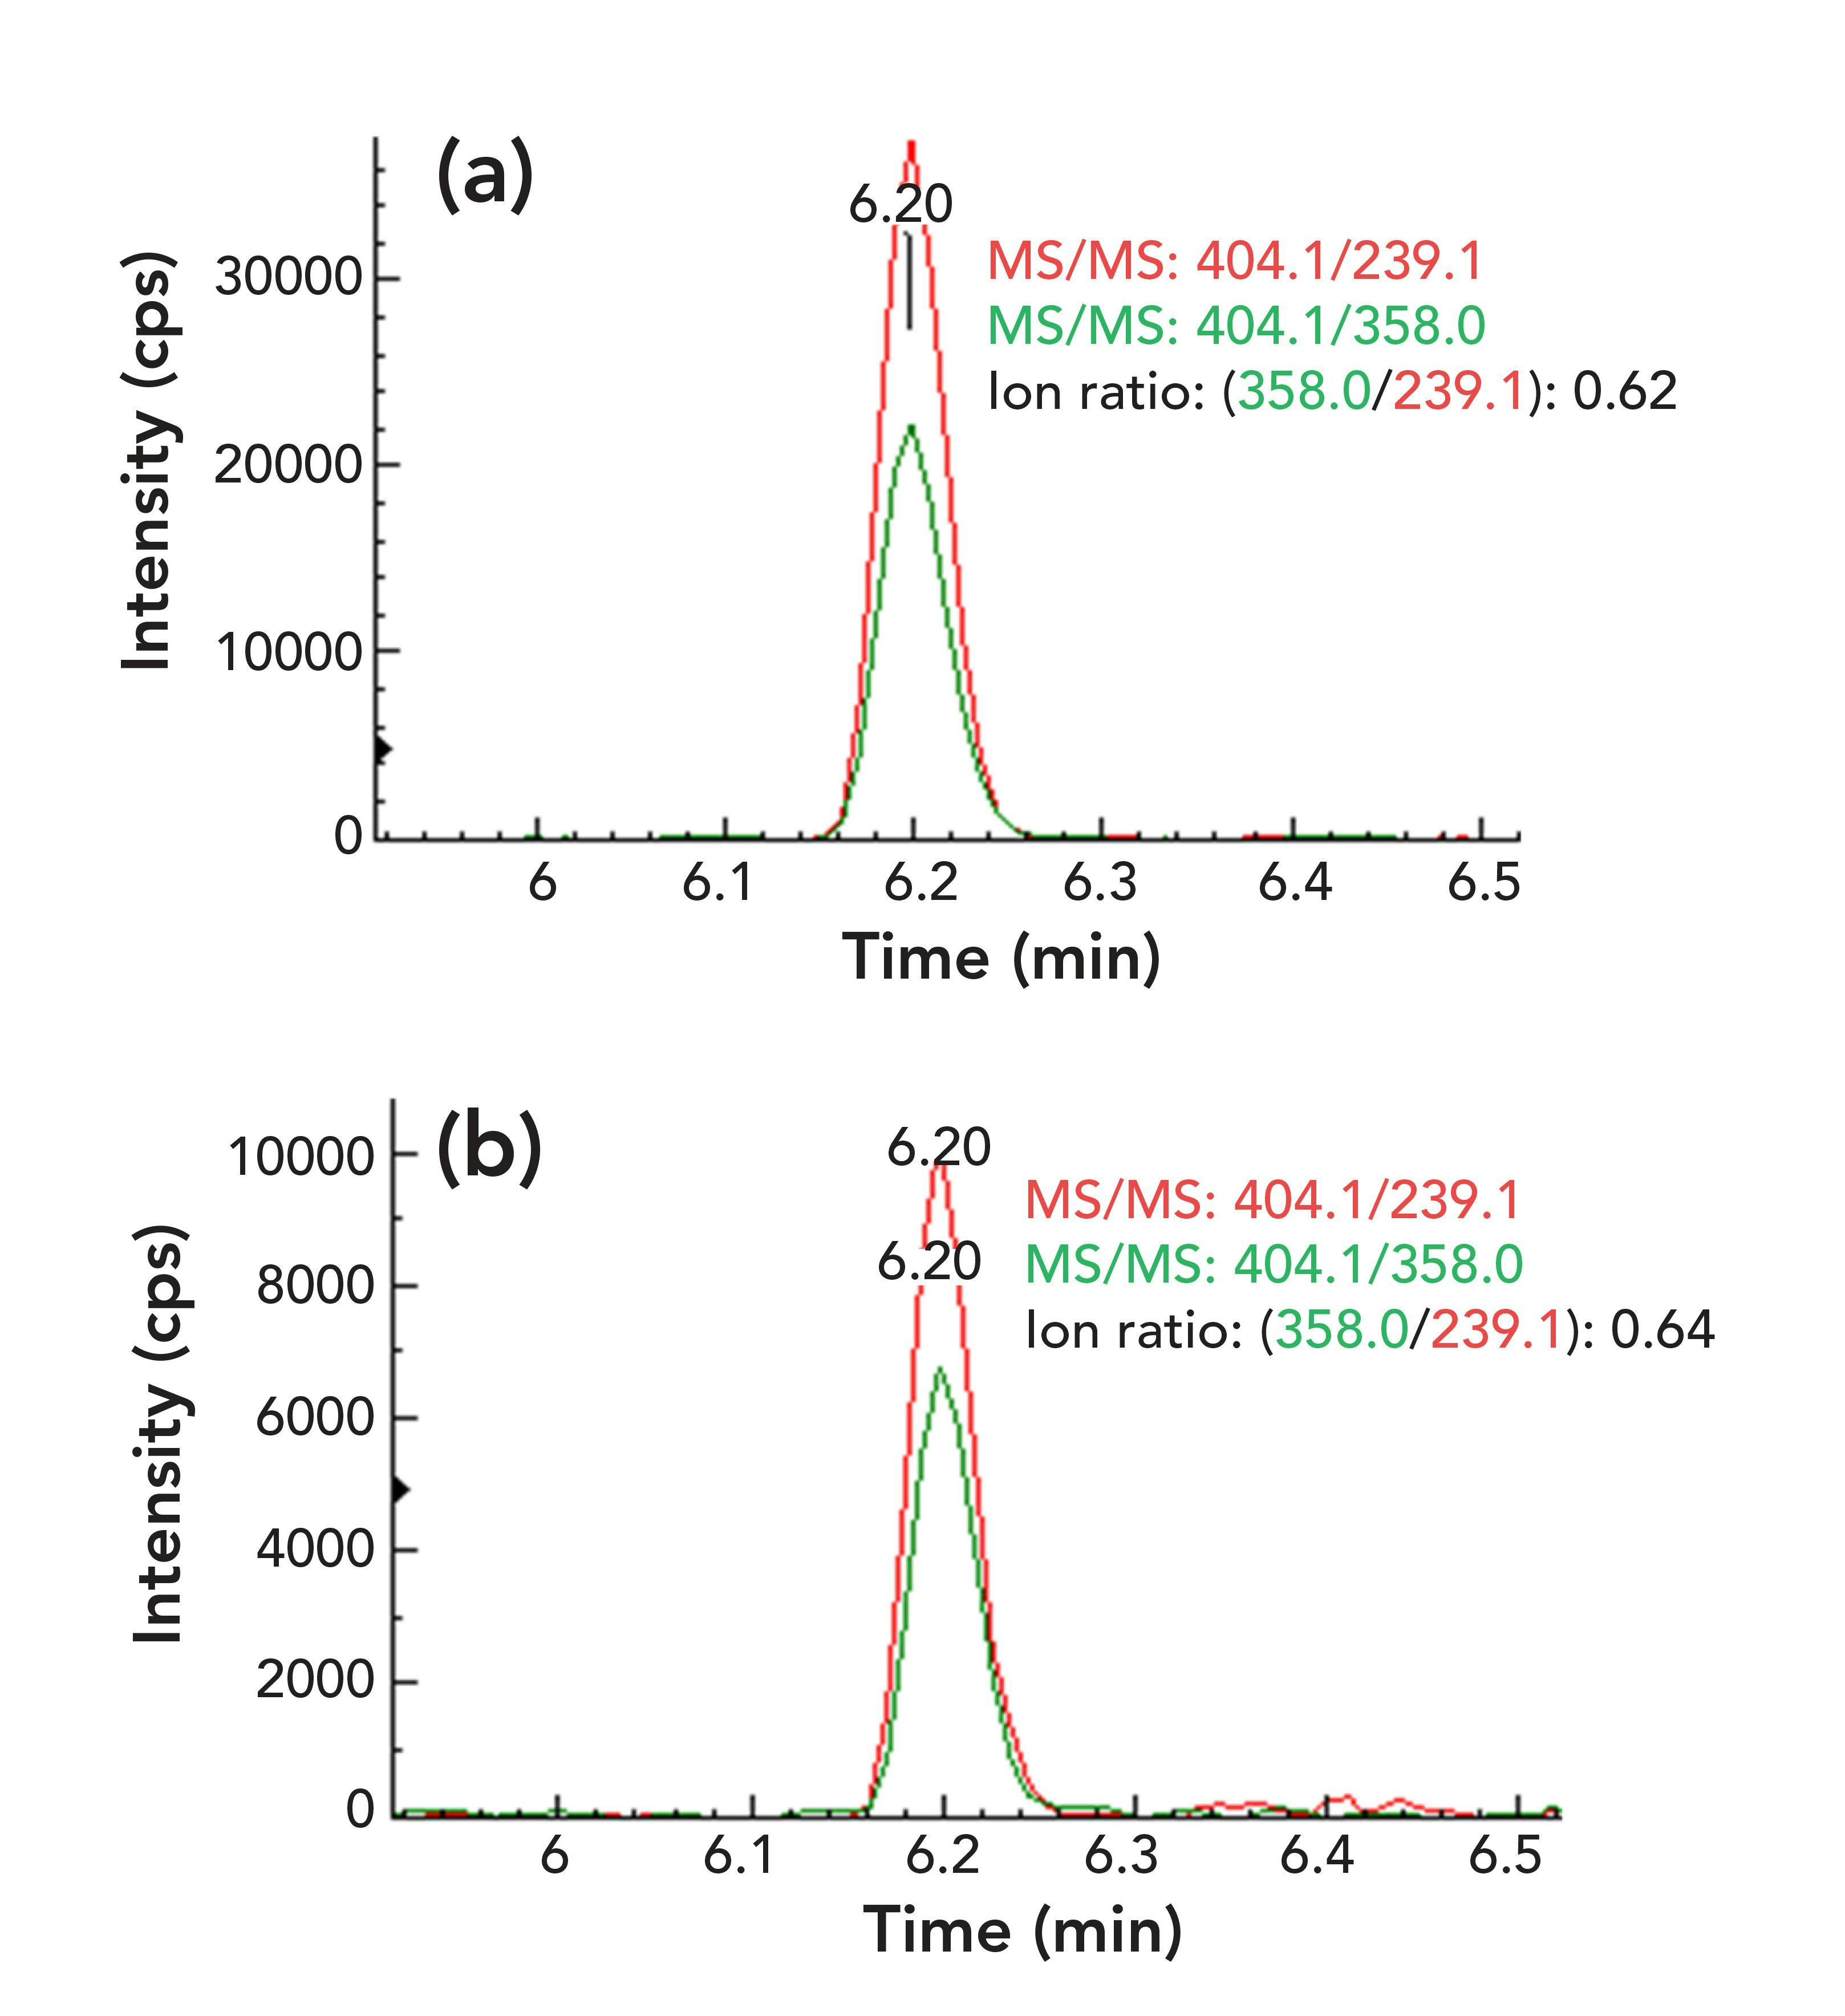 FIGURE 2: Two overlapped MS/MS chromatograms: the ion ratio of qualifier-quantifier ions of (a) OTA in a reference standard, and (b) in a chili powder sample blank.